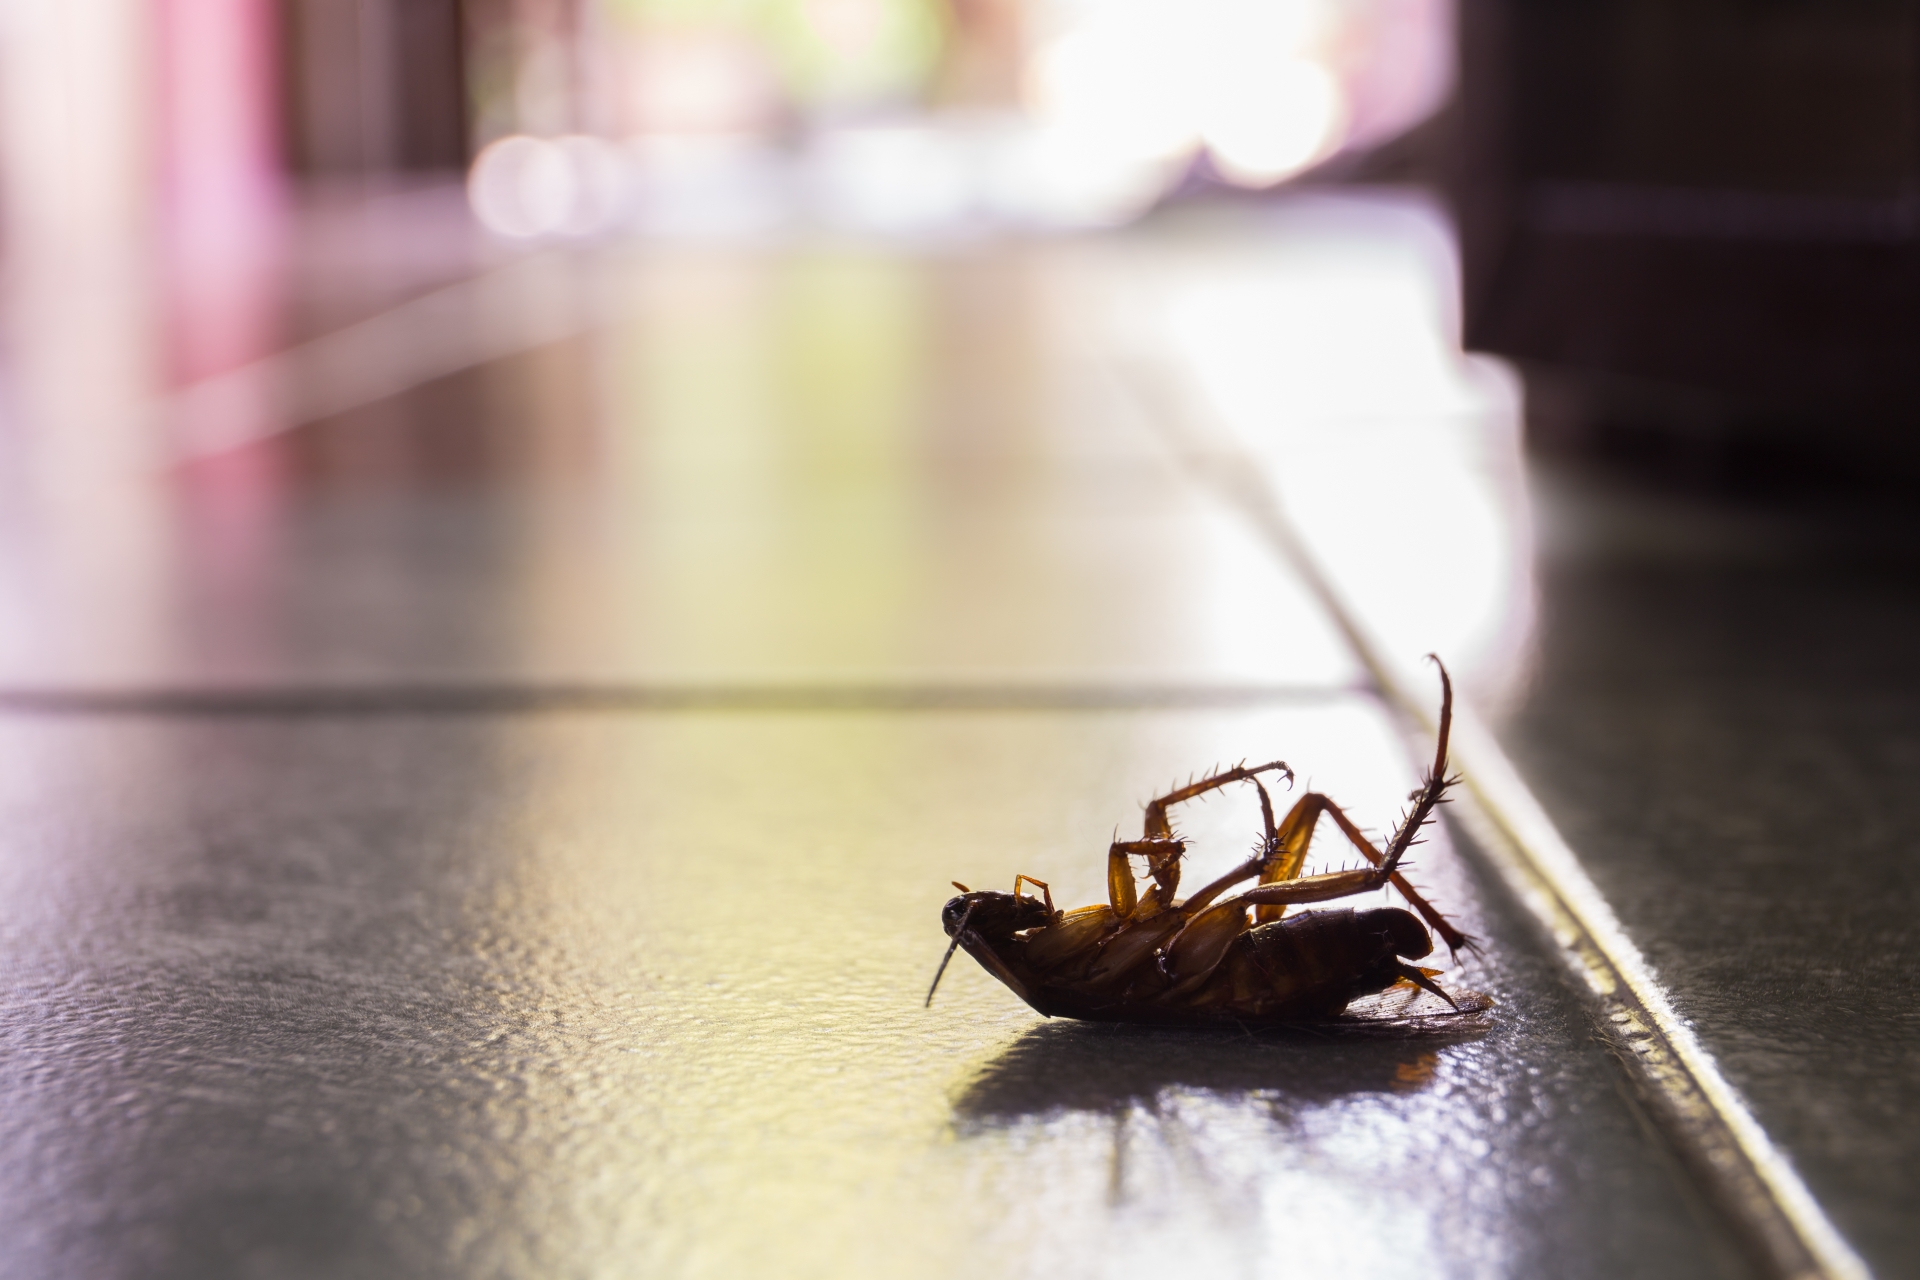 Cockroach Control, Pest Control in Surbiton, Long Ditton, KT6. Call Now 020 8166 9746